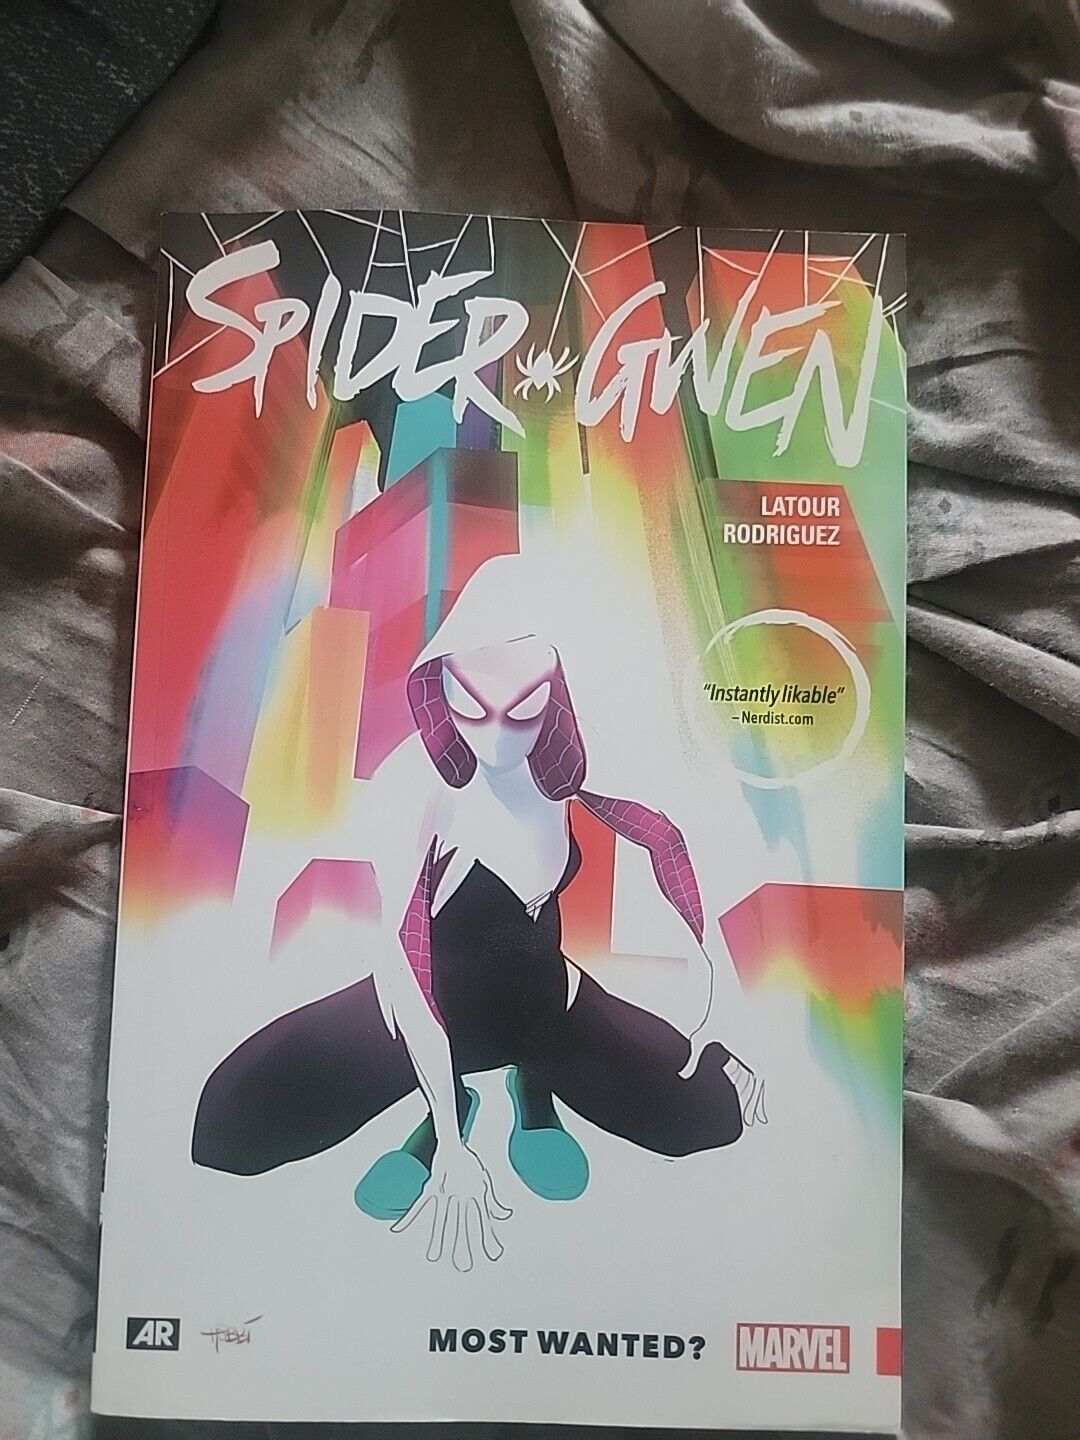 Spider-Gwen #0  Most Wanted? Marvel Trade Paperback 